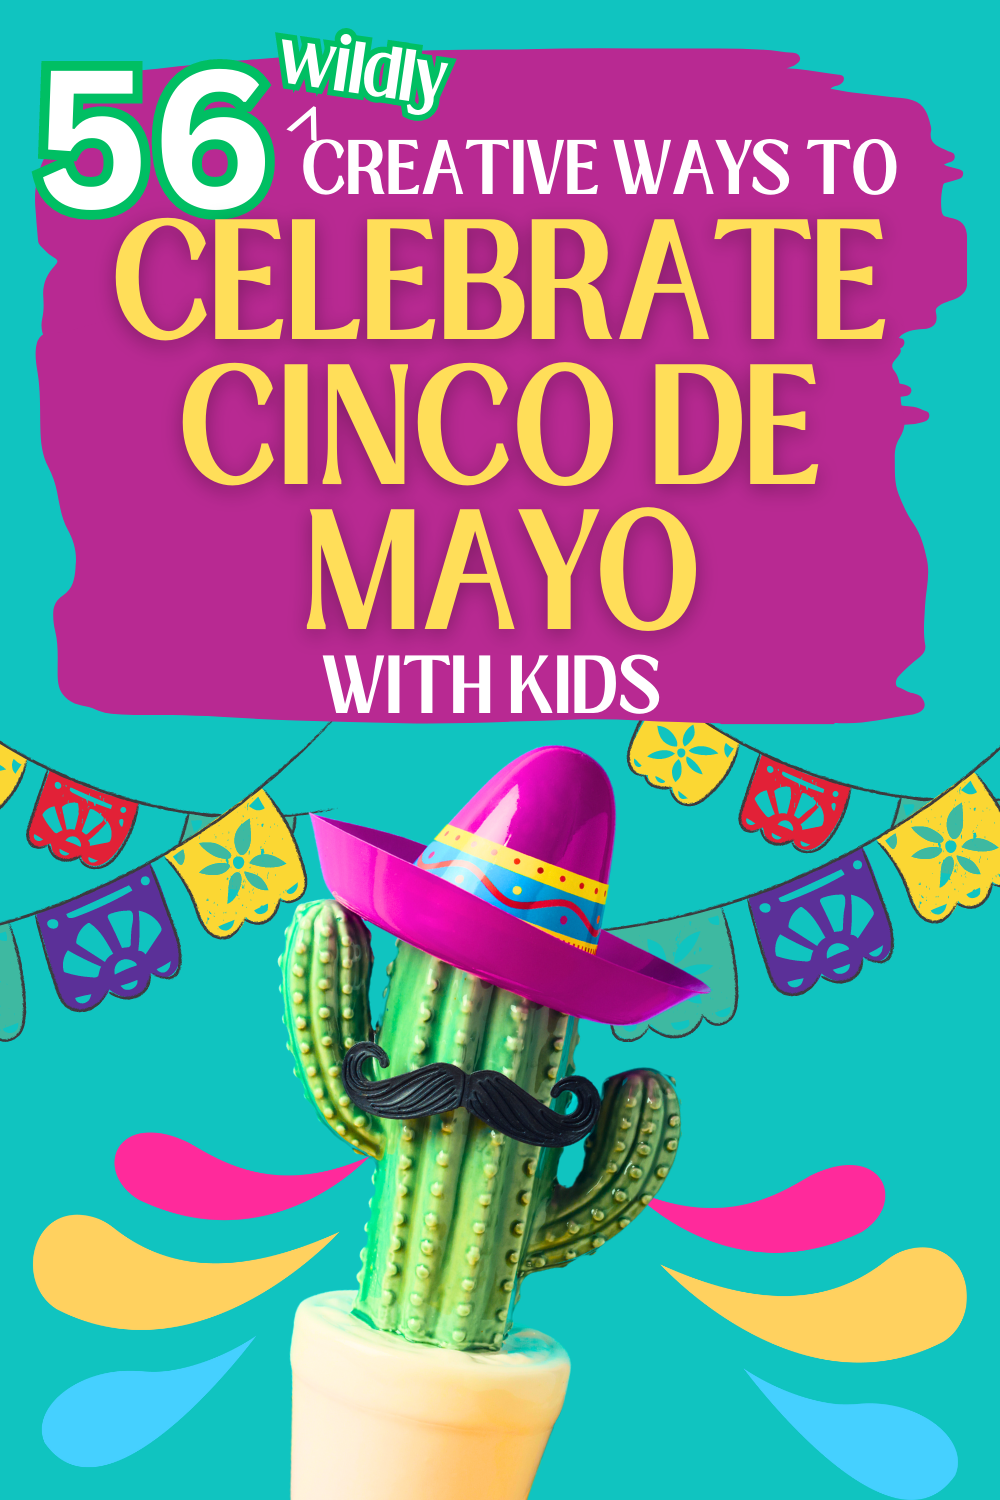 Awesome Cinco de Mayo Activities For Children (Cinco de mayo fun activities!) over funny image of a cactus with a mustache wearing a sombrero at a Cinco de Mayo celebration